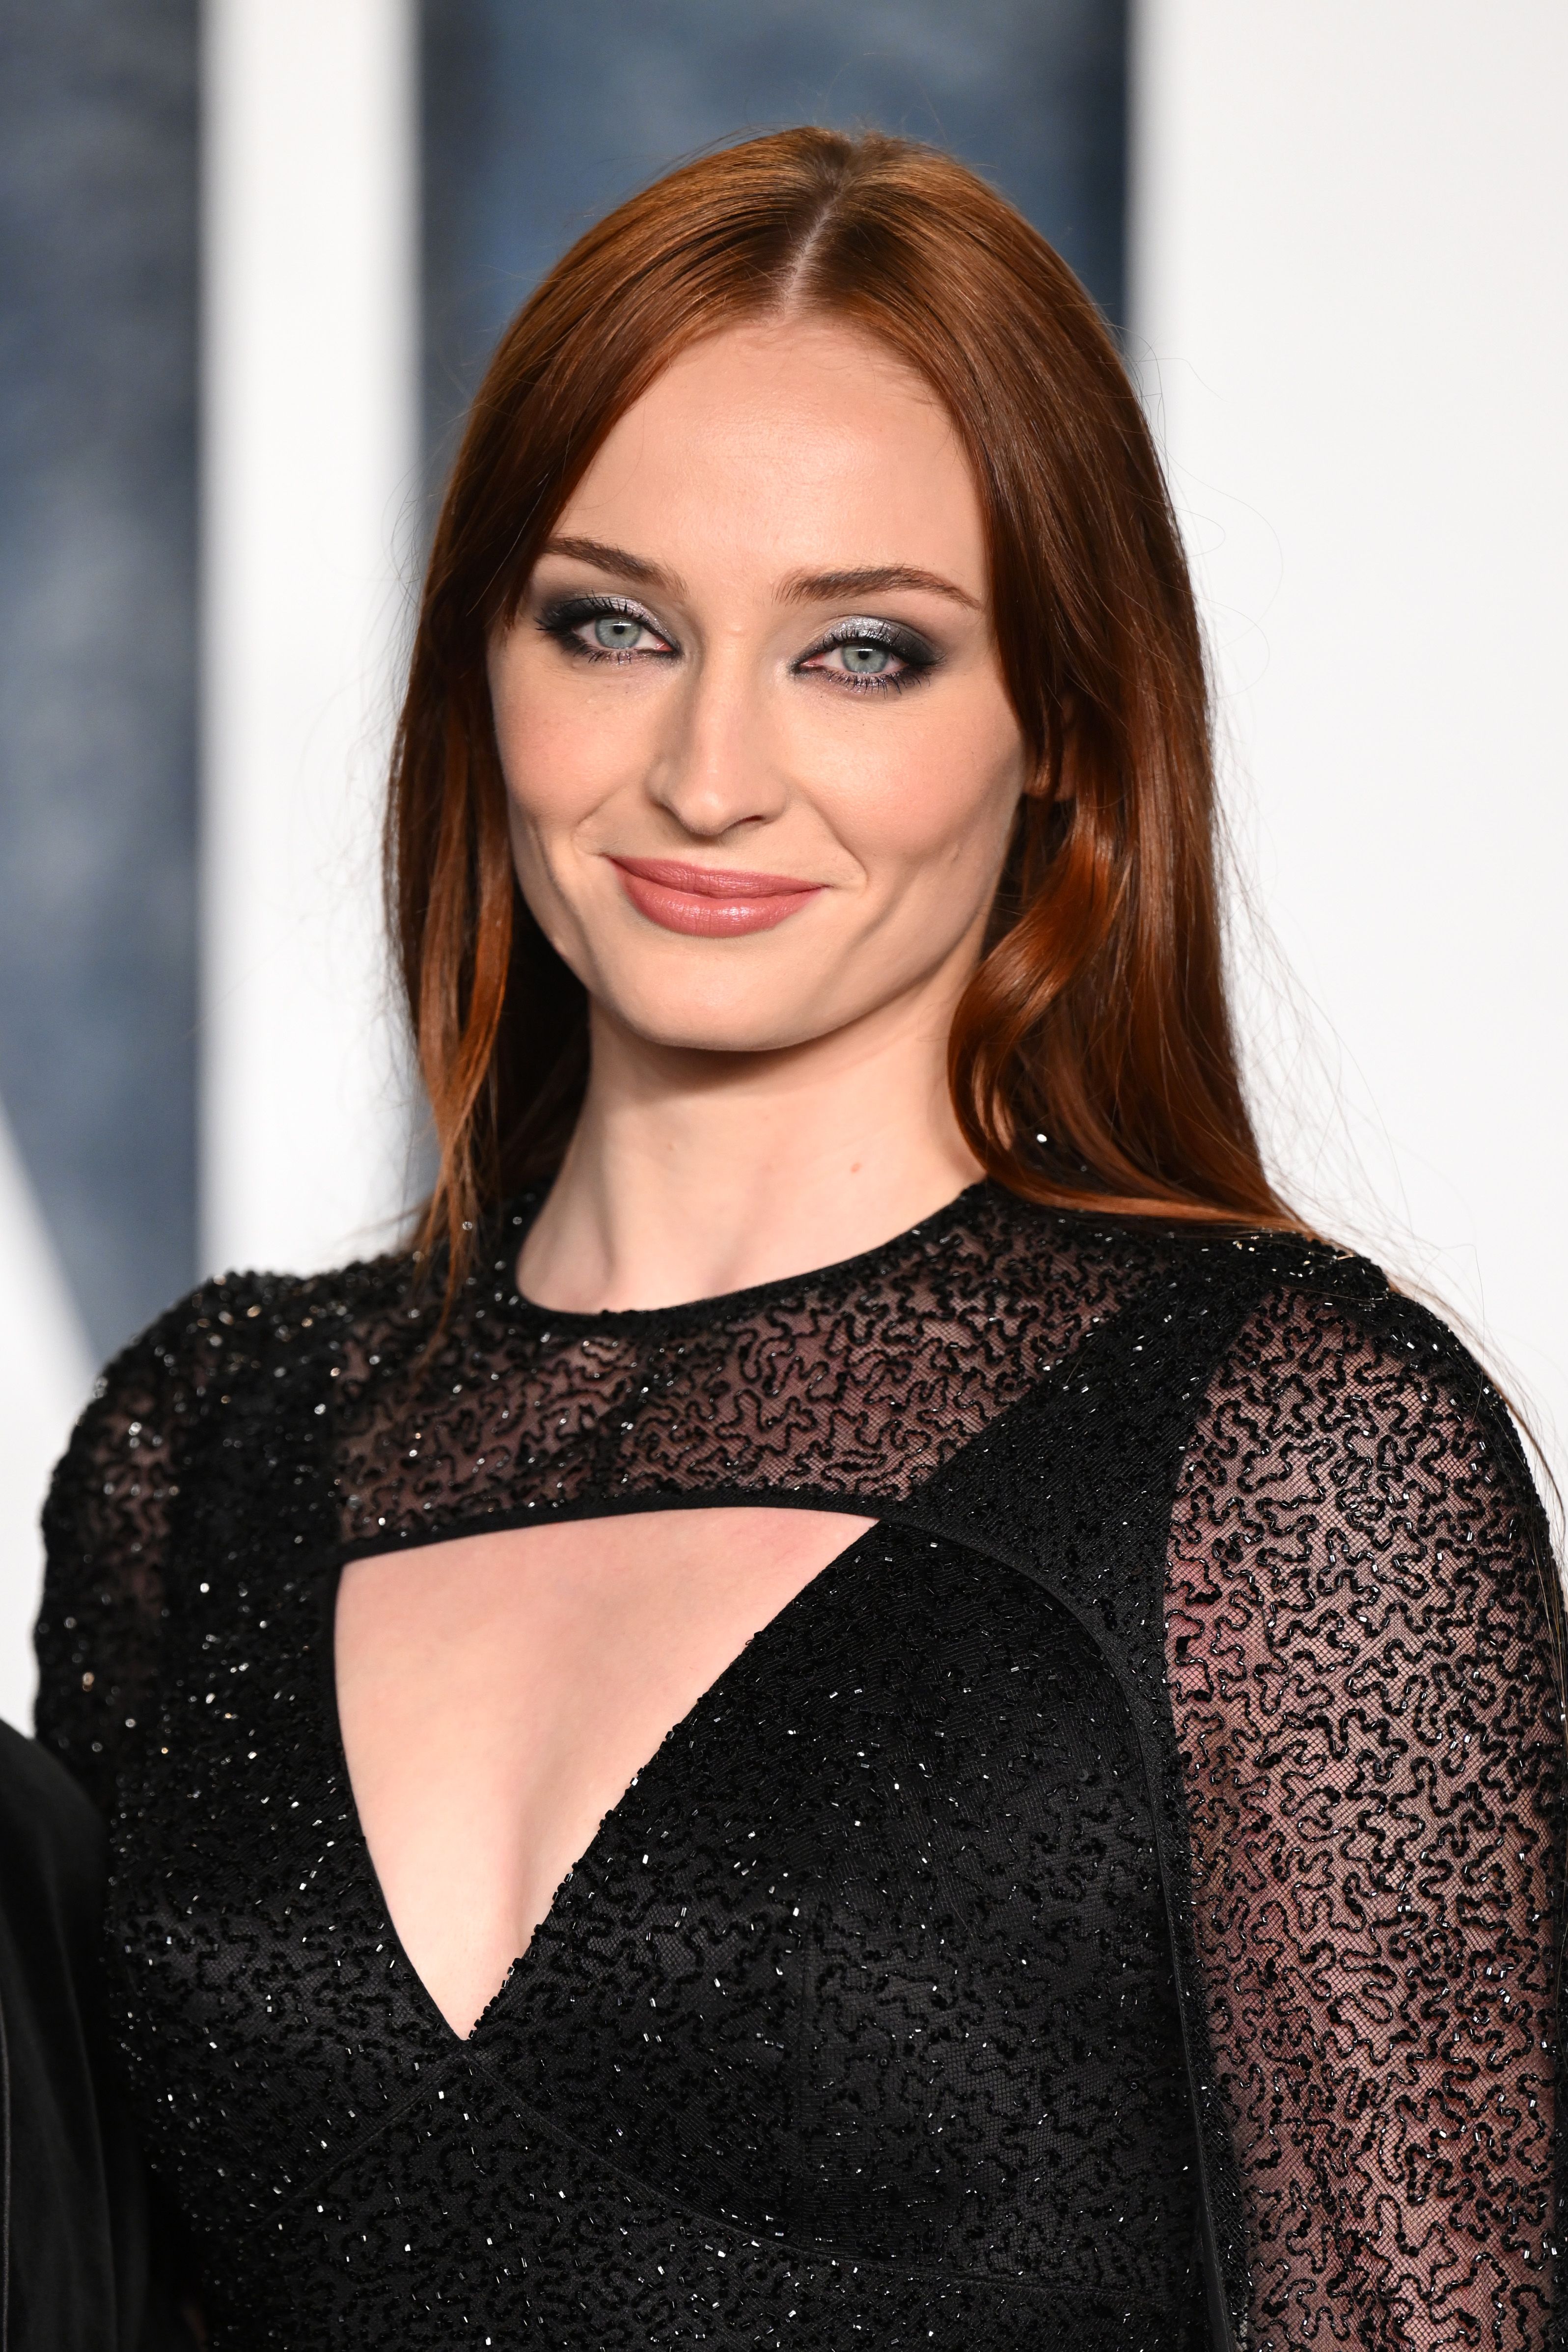 Sophie Turner shows off her newly dyed red hair